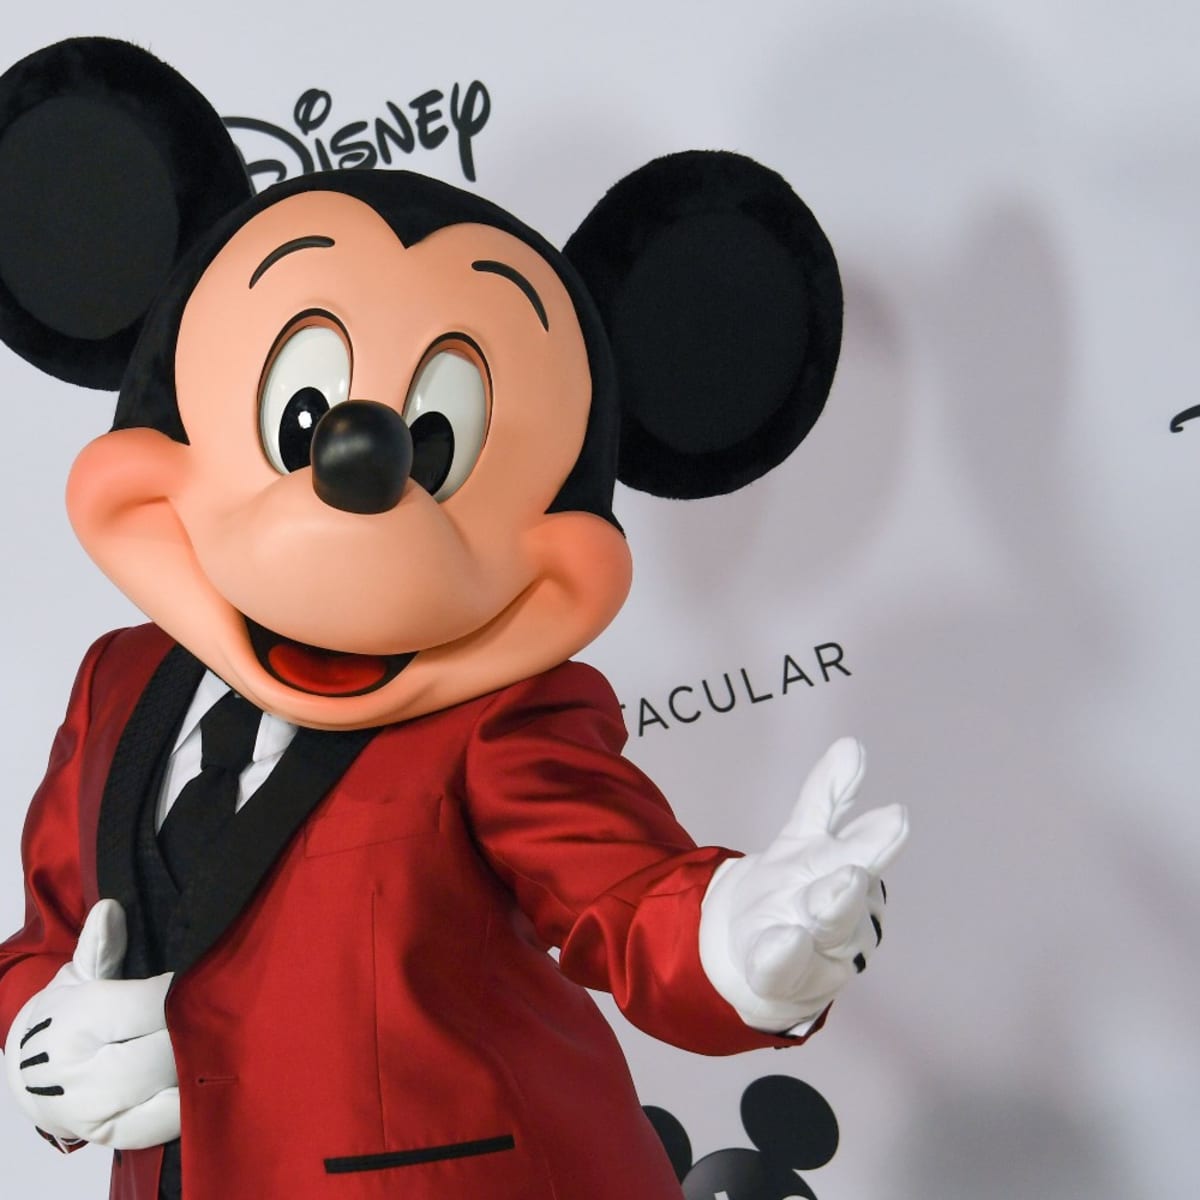 Mickey Mouse, Other Characters Lose Copyright Protection - The New